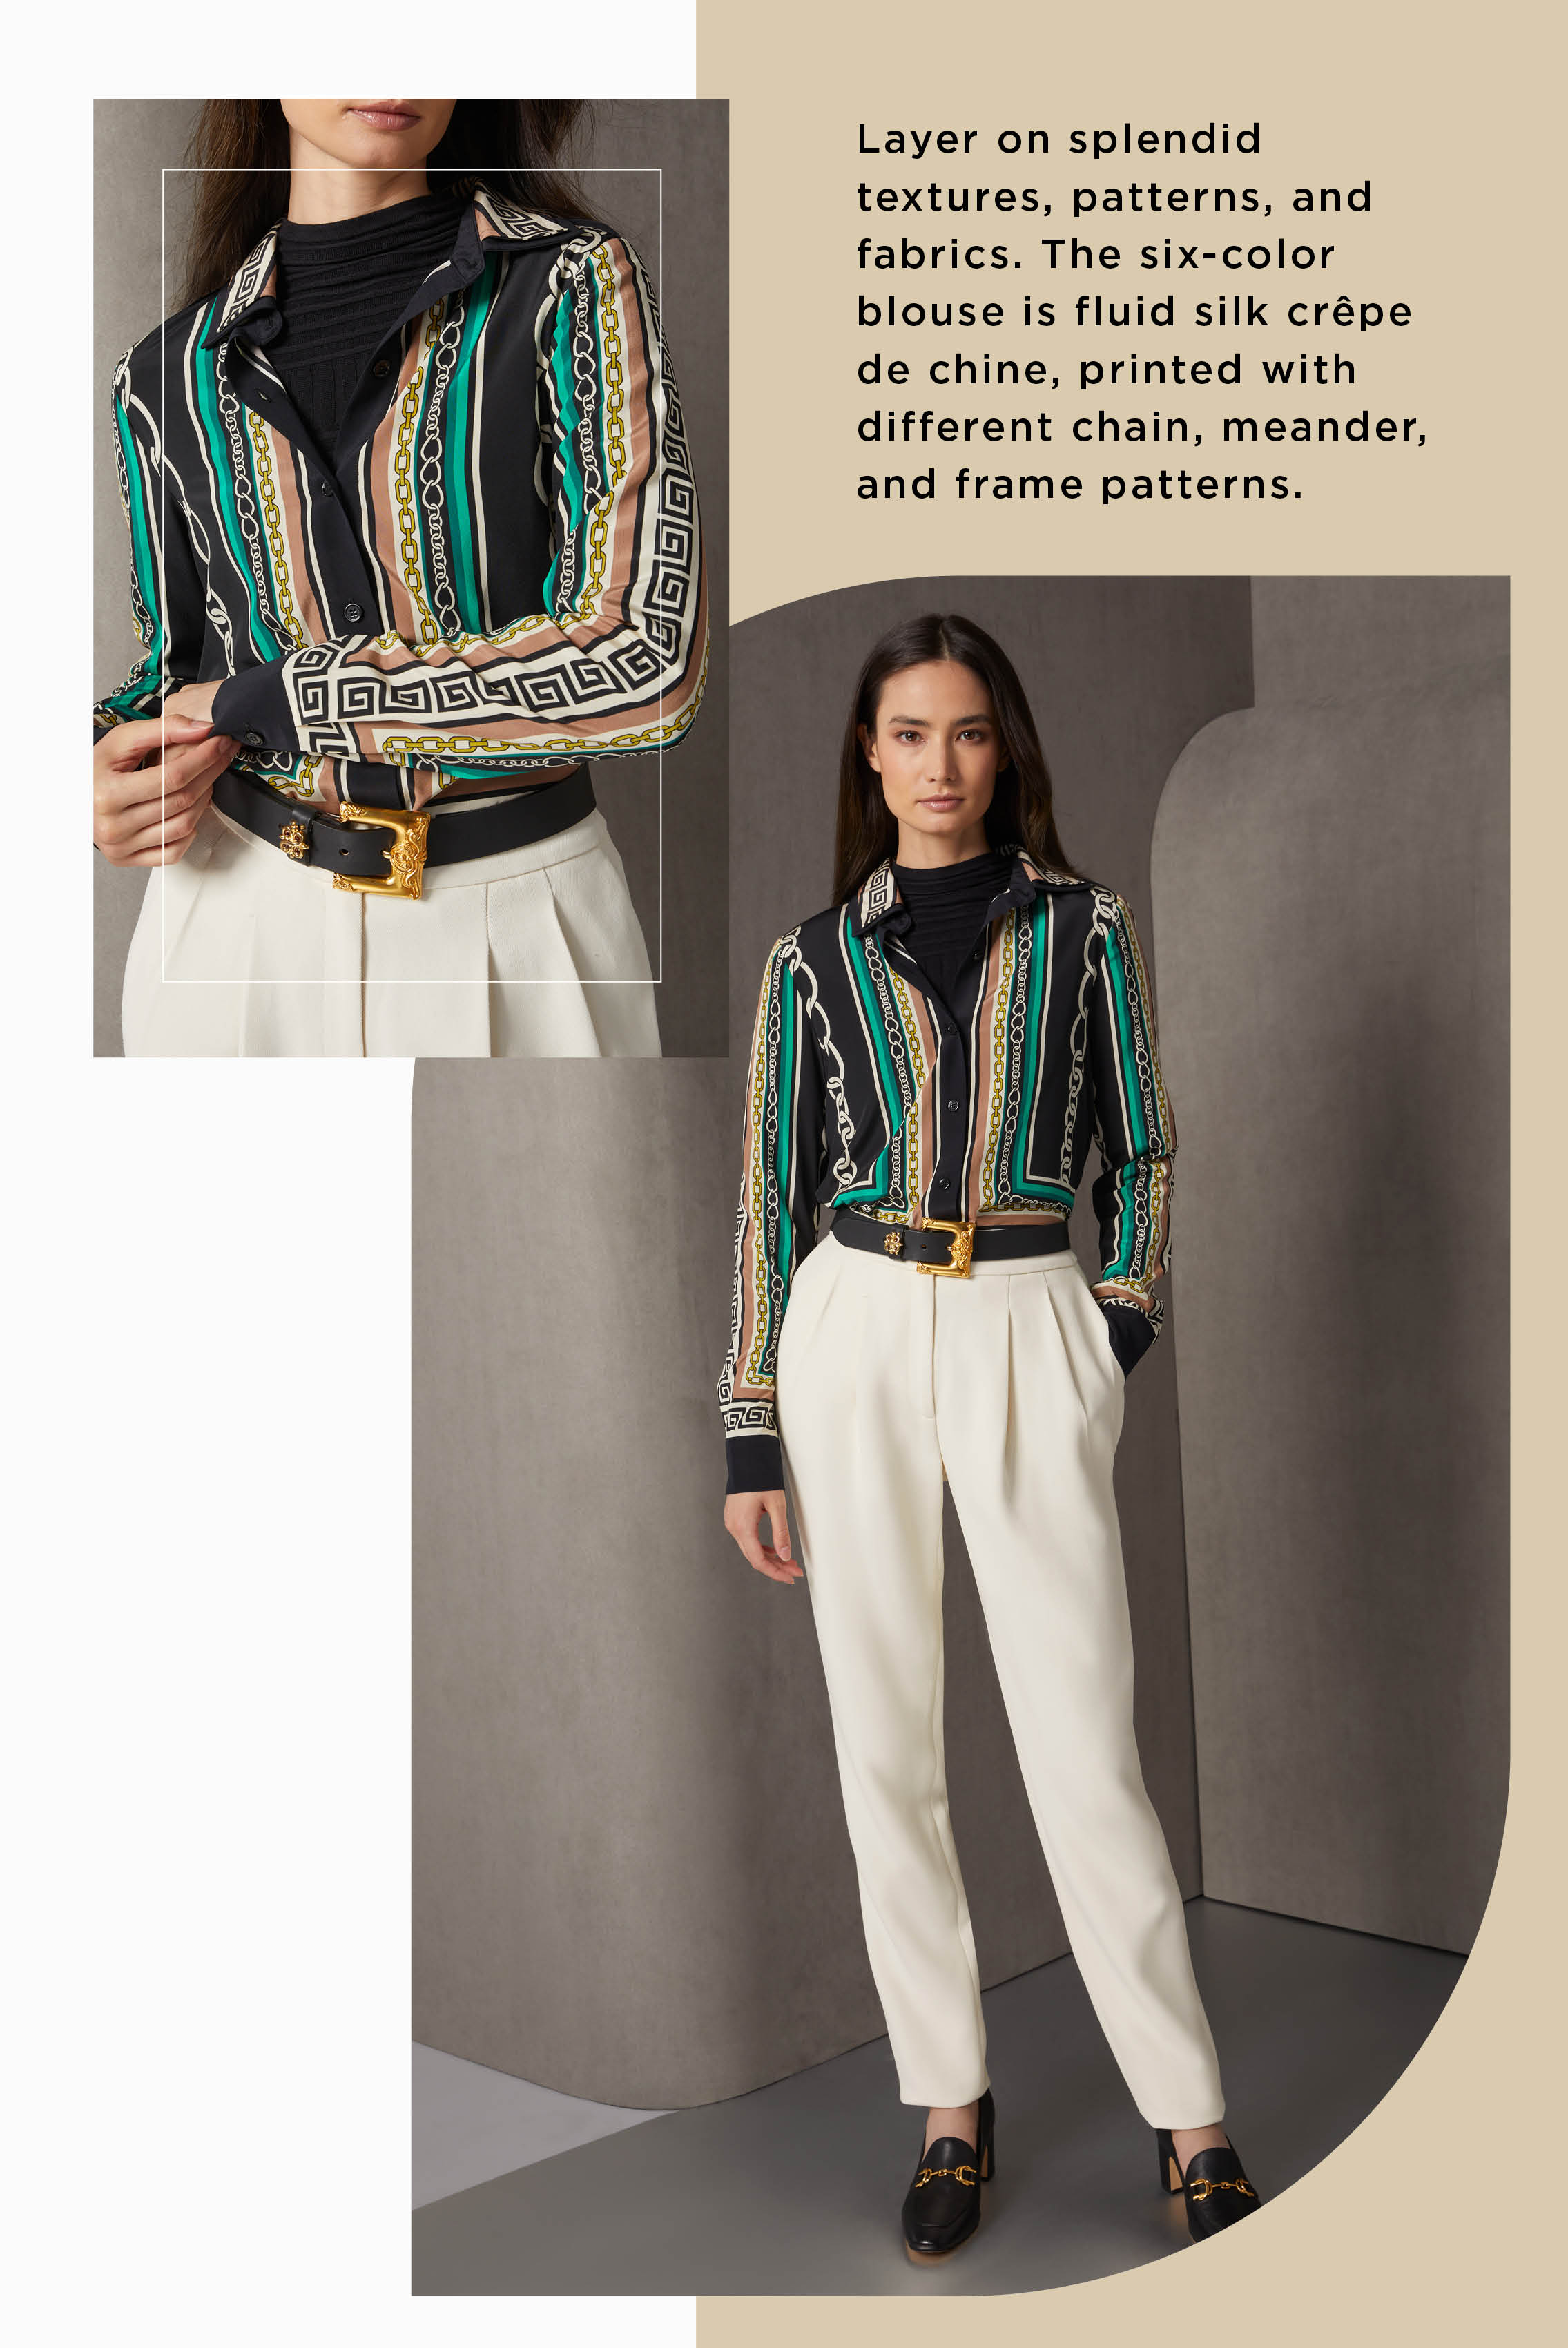 Layer on splendid textures, patterns, and fabrics. The six-color blouse is fluid silk crêpe de chine, printed with different chain, meander, and frame patterns.